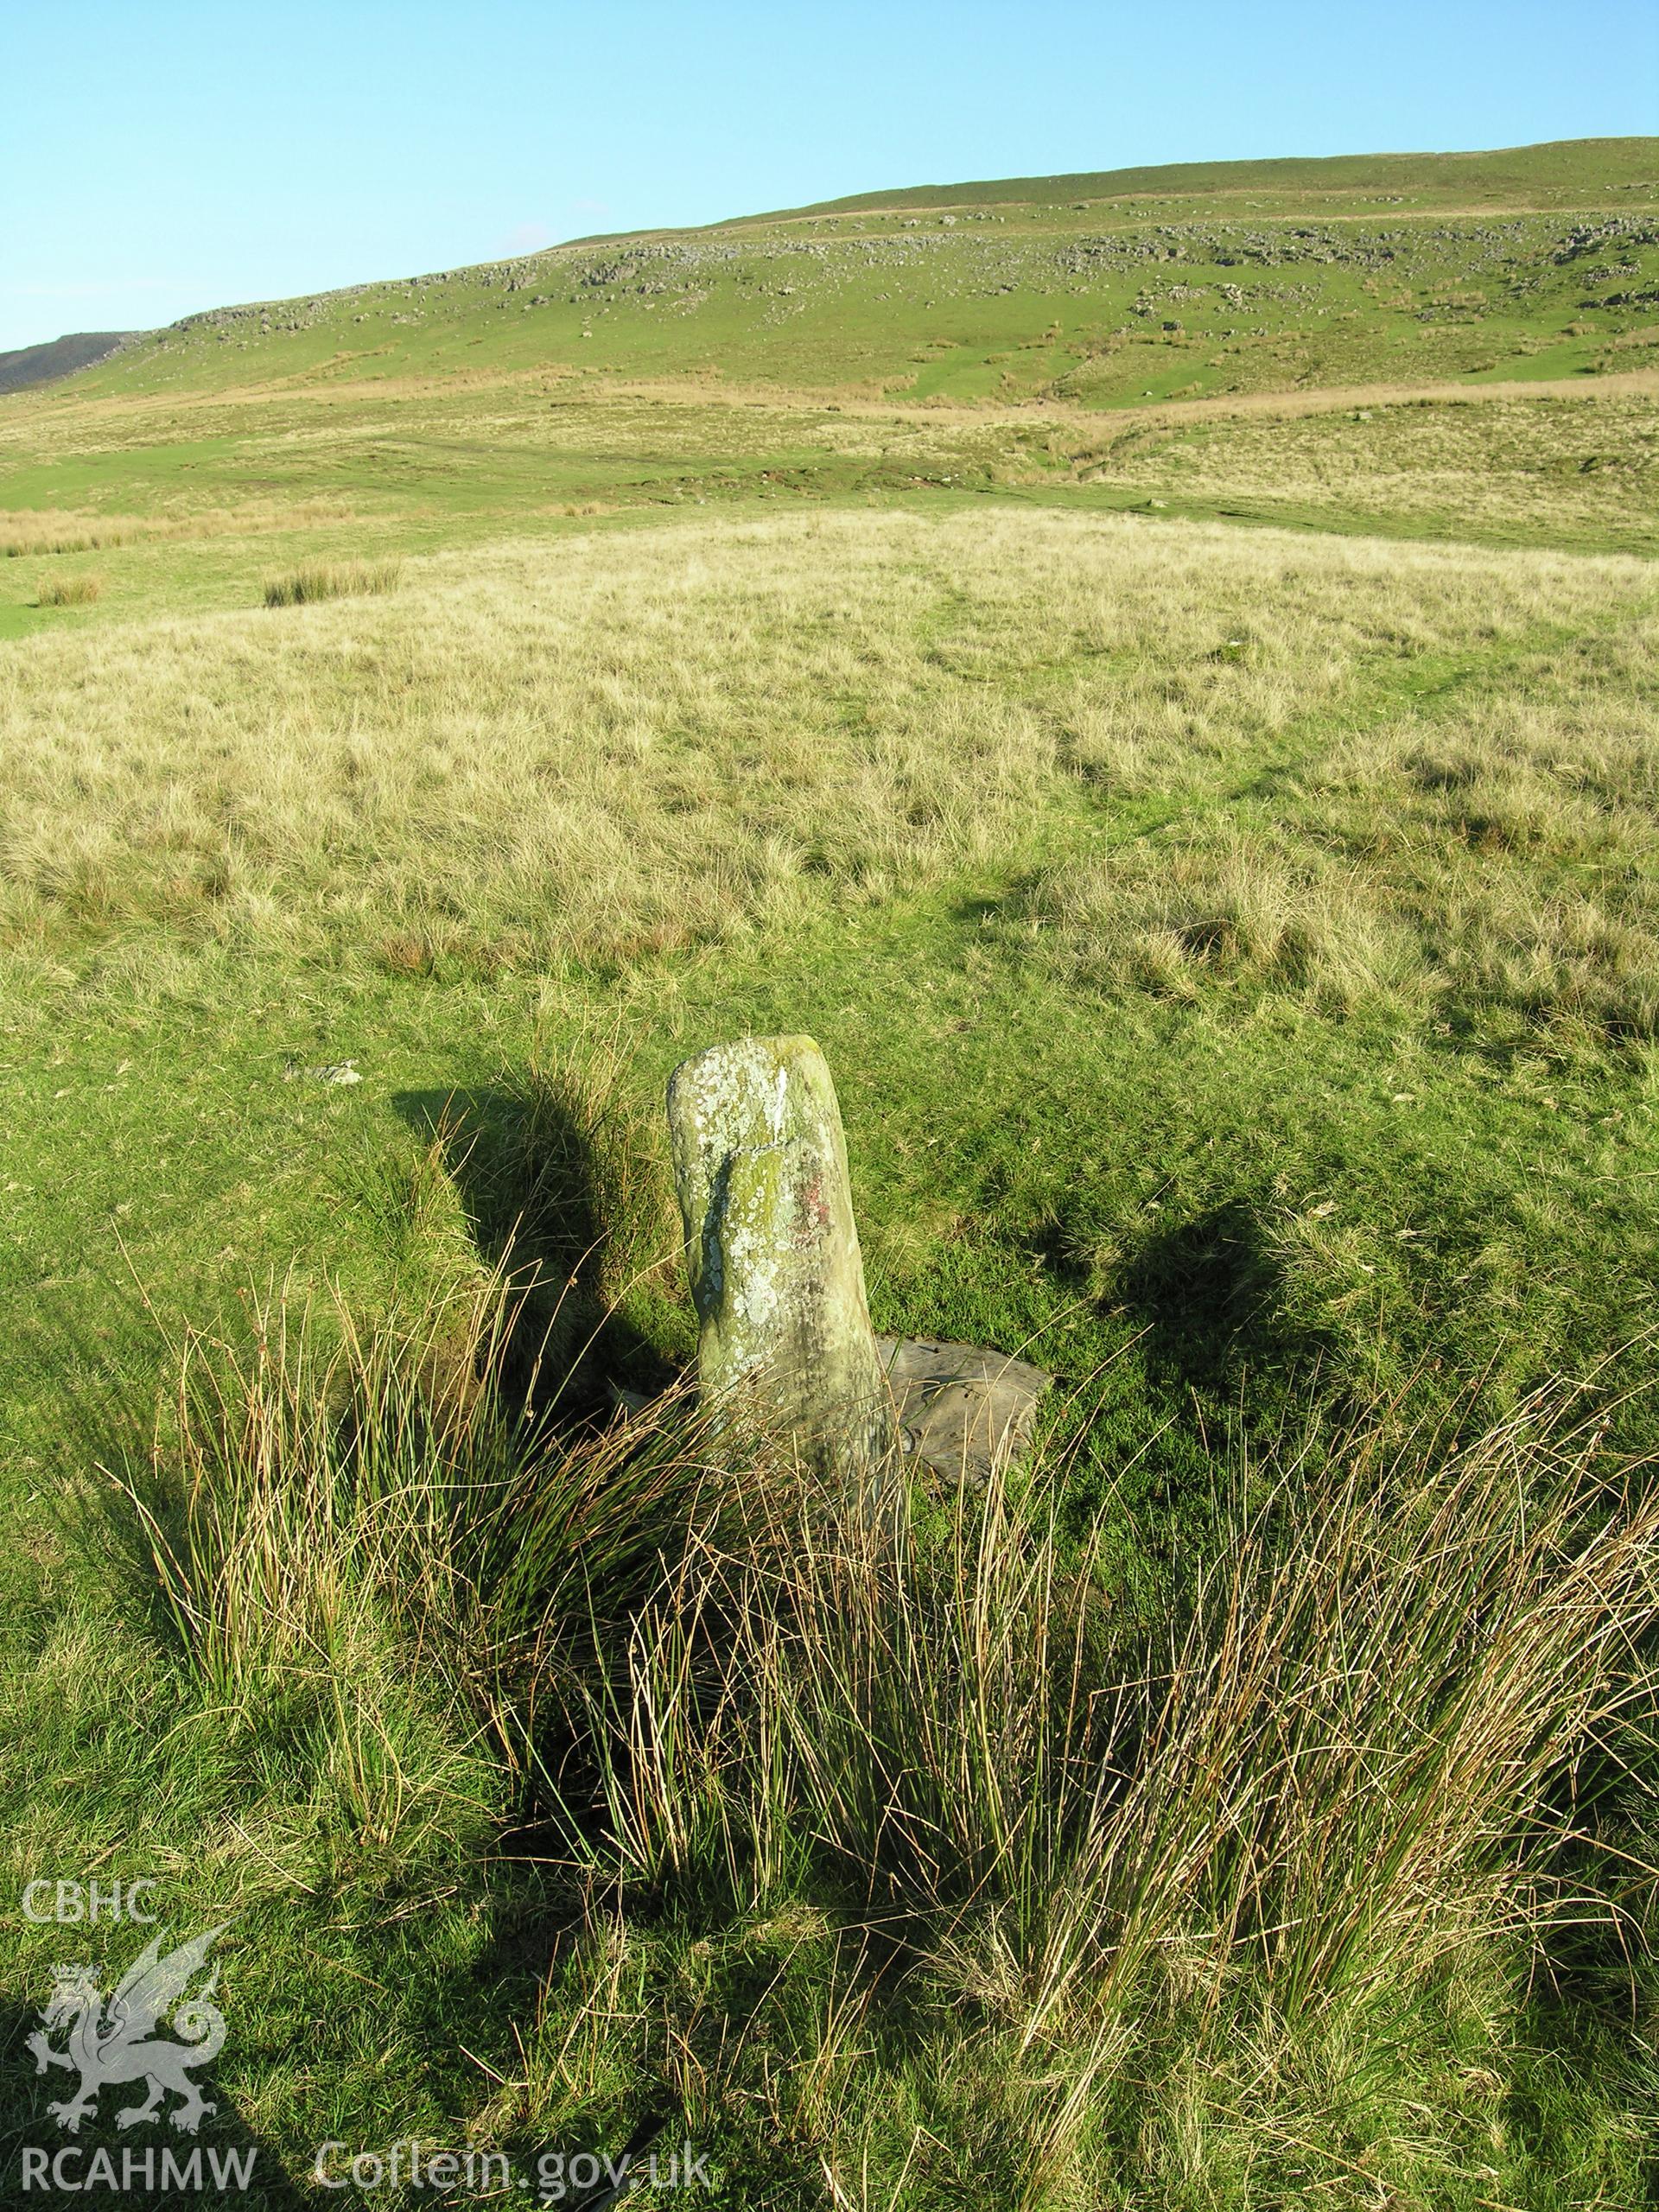 Digital colour photograph of Pontsticill Inscribed Stone taken on 24/10/2006 by R.A. Hayman during th Cefn yr Ystrad Upland Survey undertaken by Hayman and Horton.